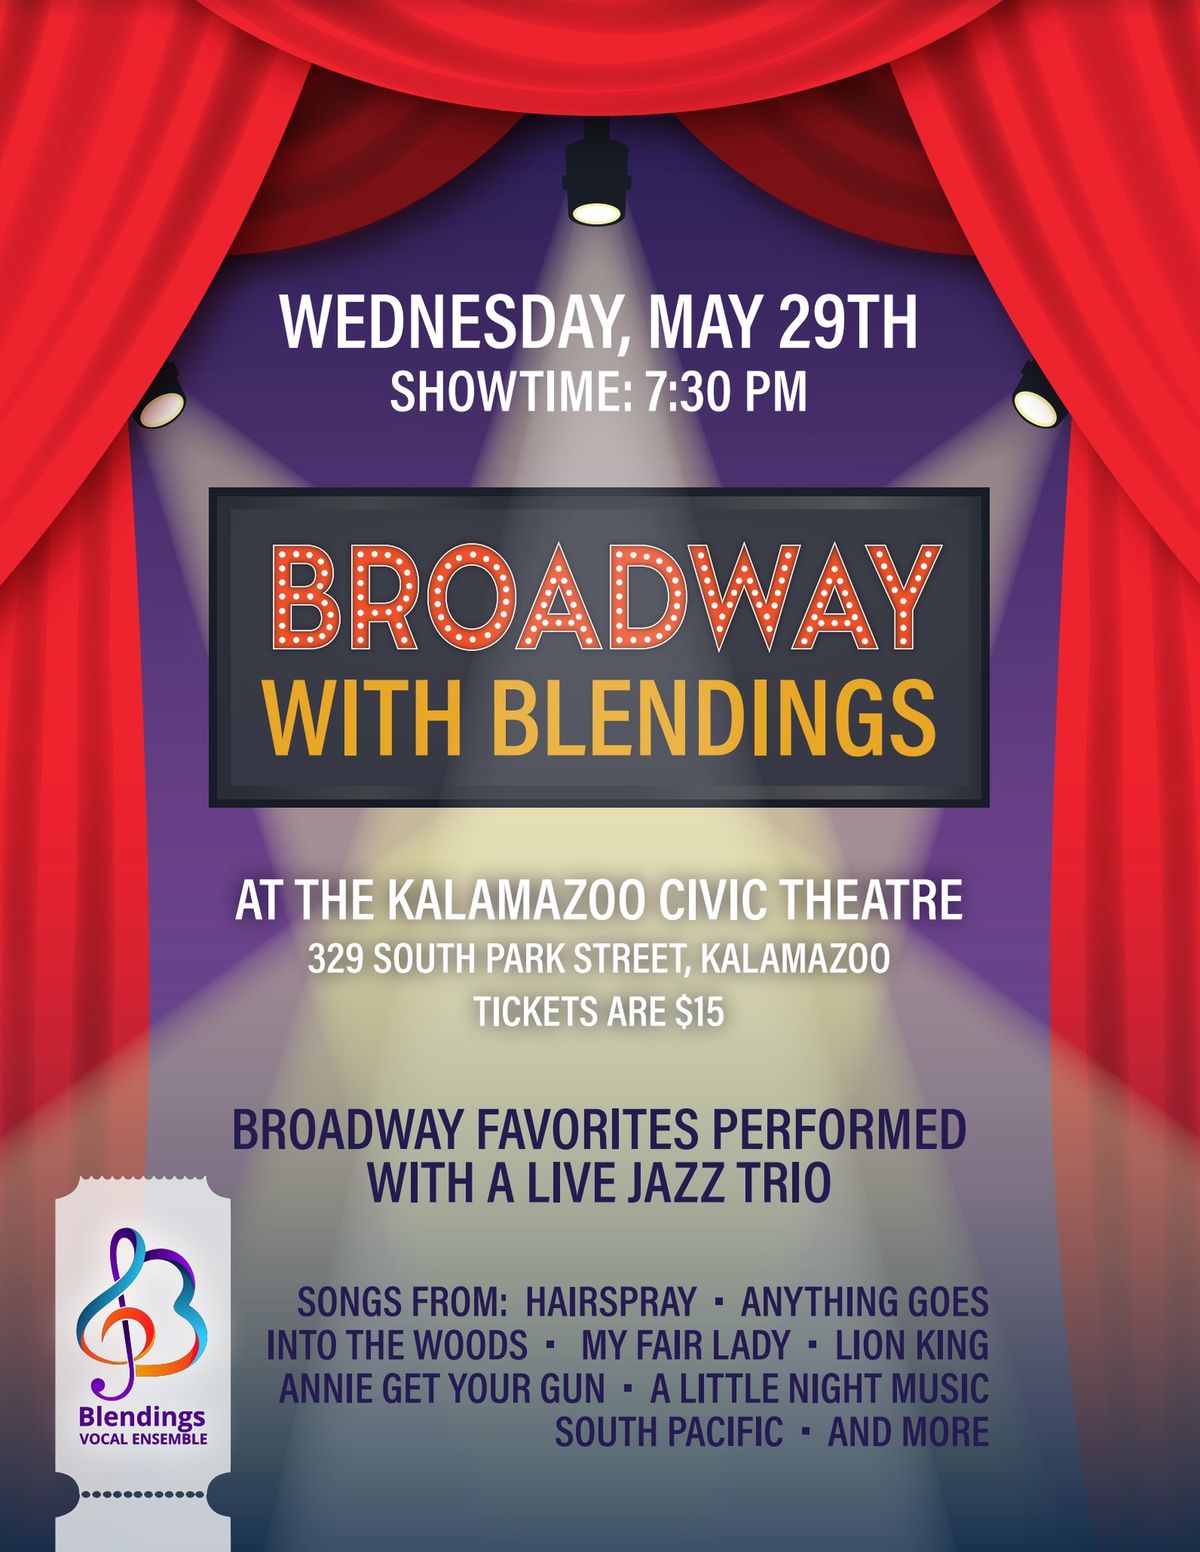 Broadway with Blendings